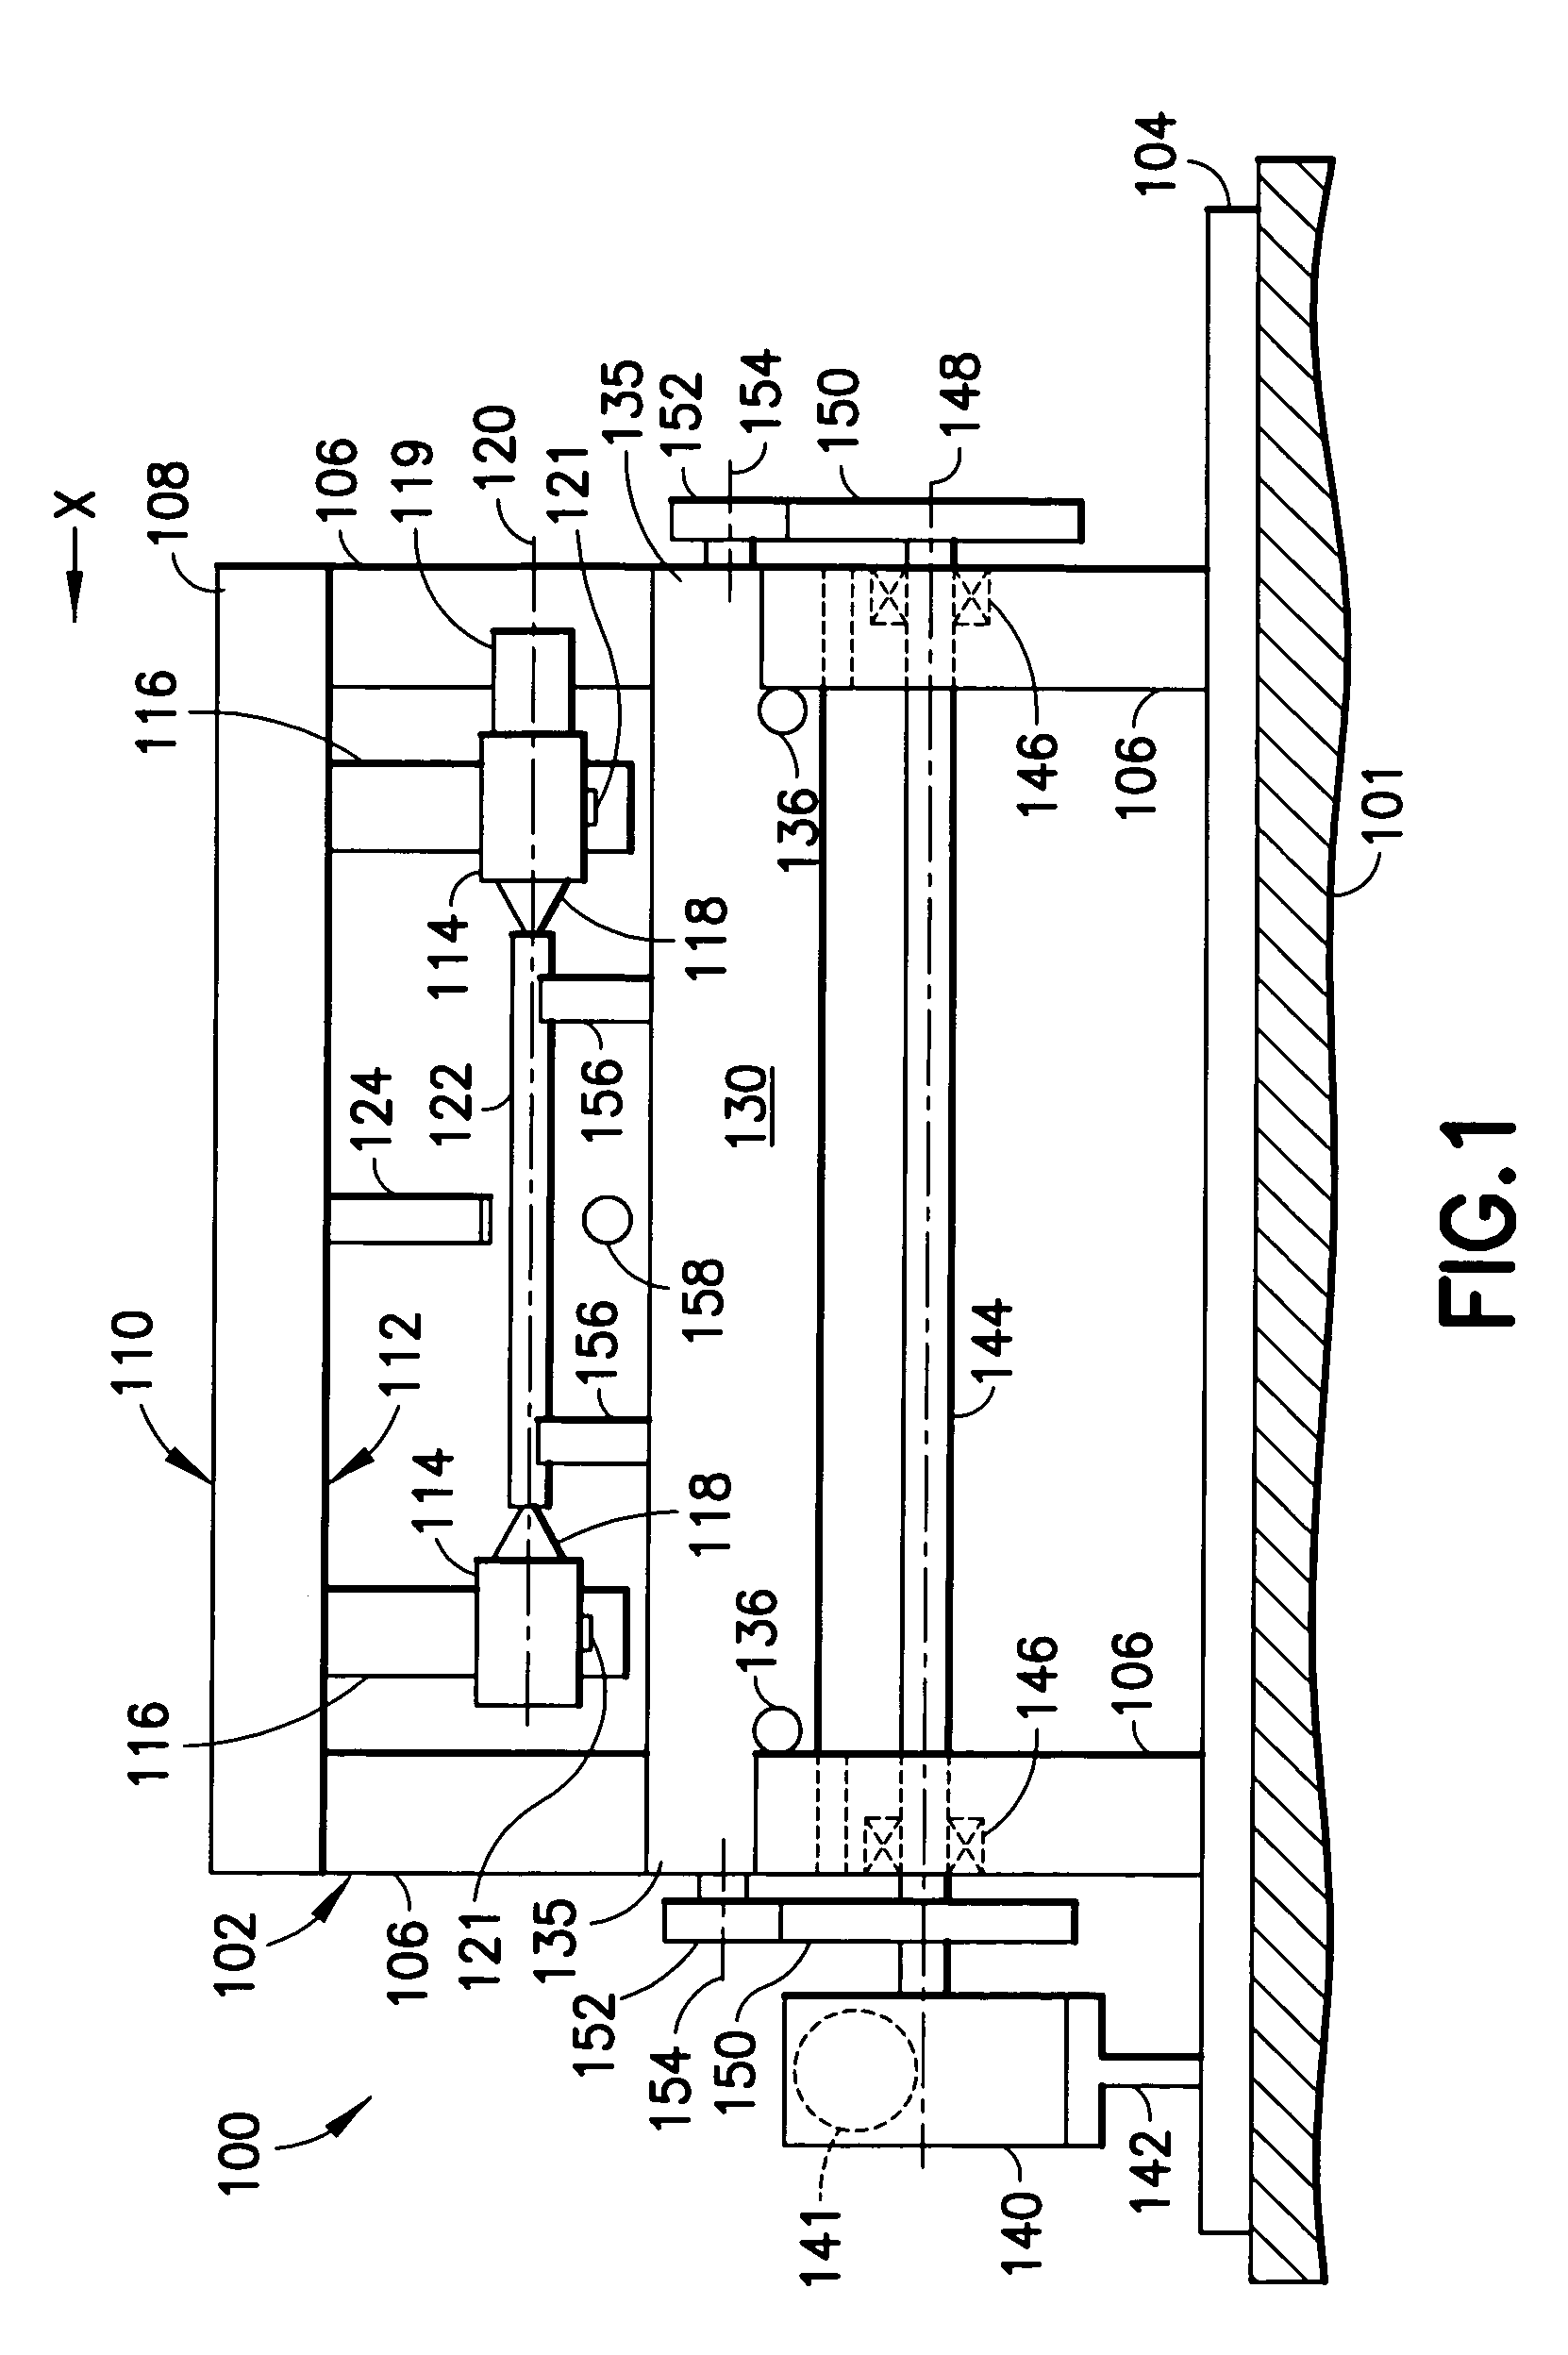 Bend-straightening machine with vertically movable table